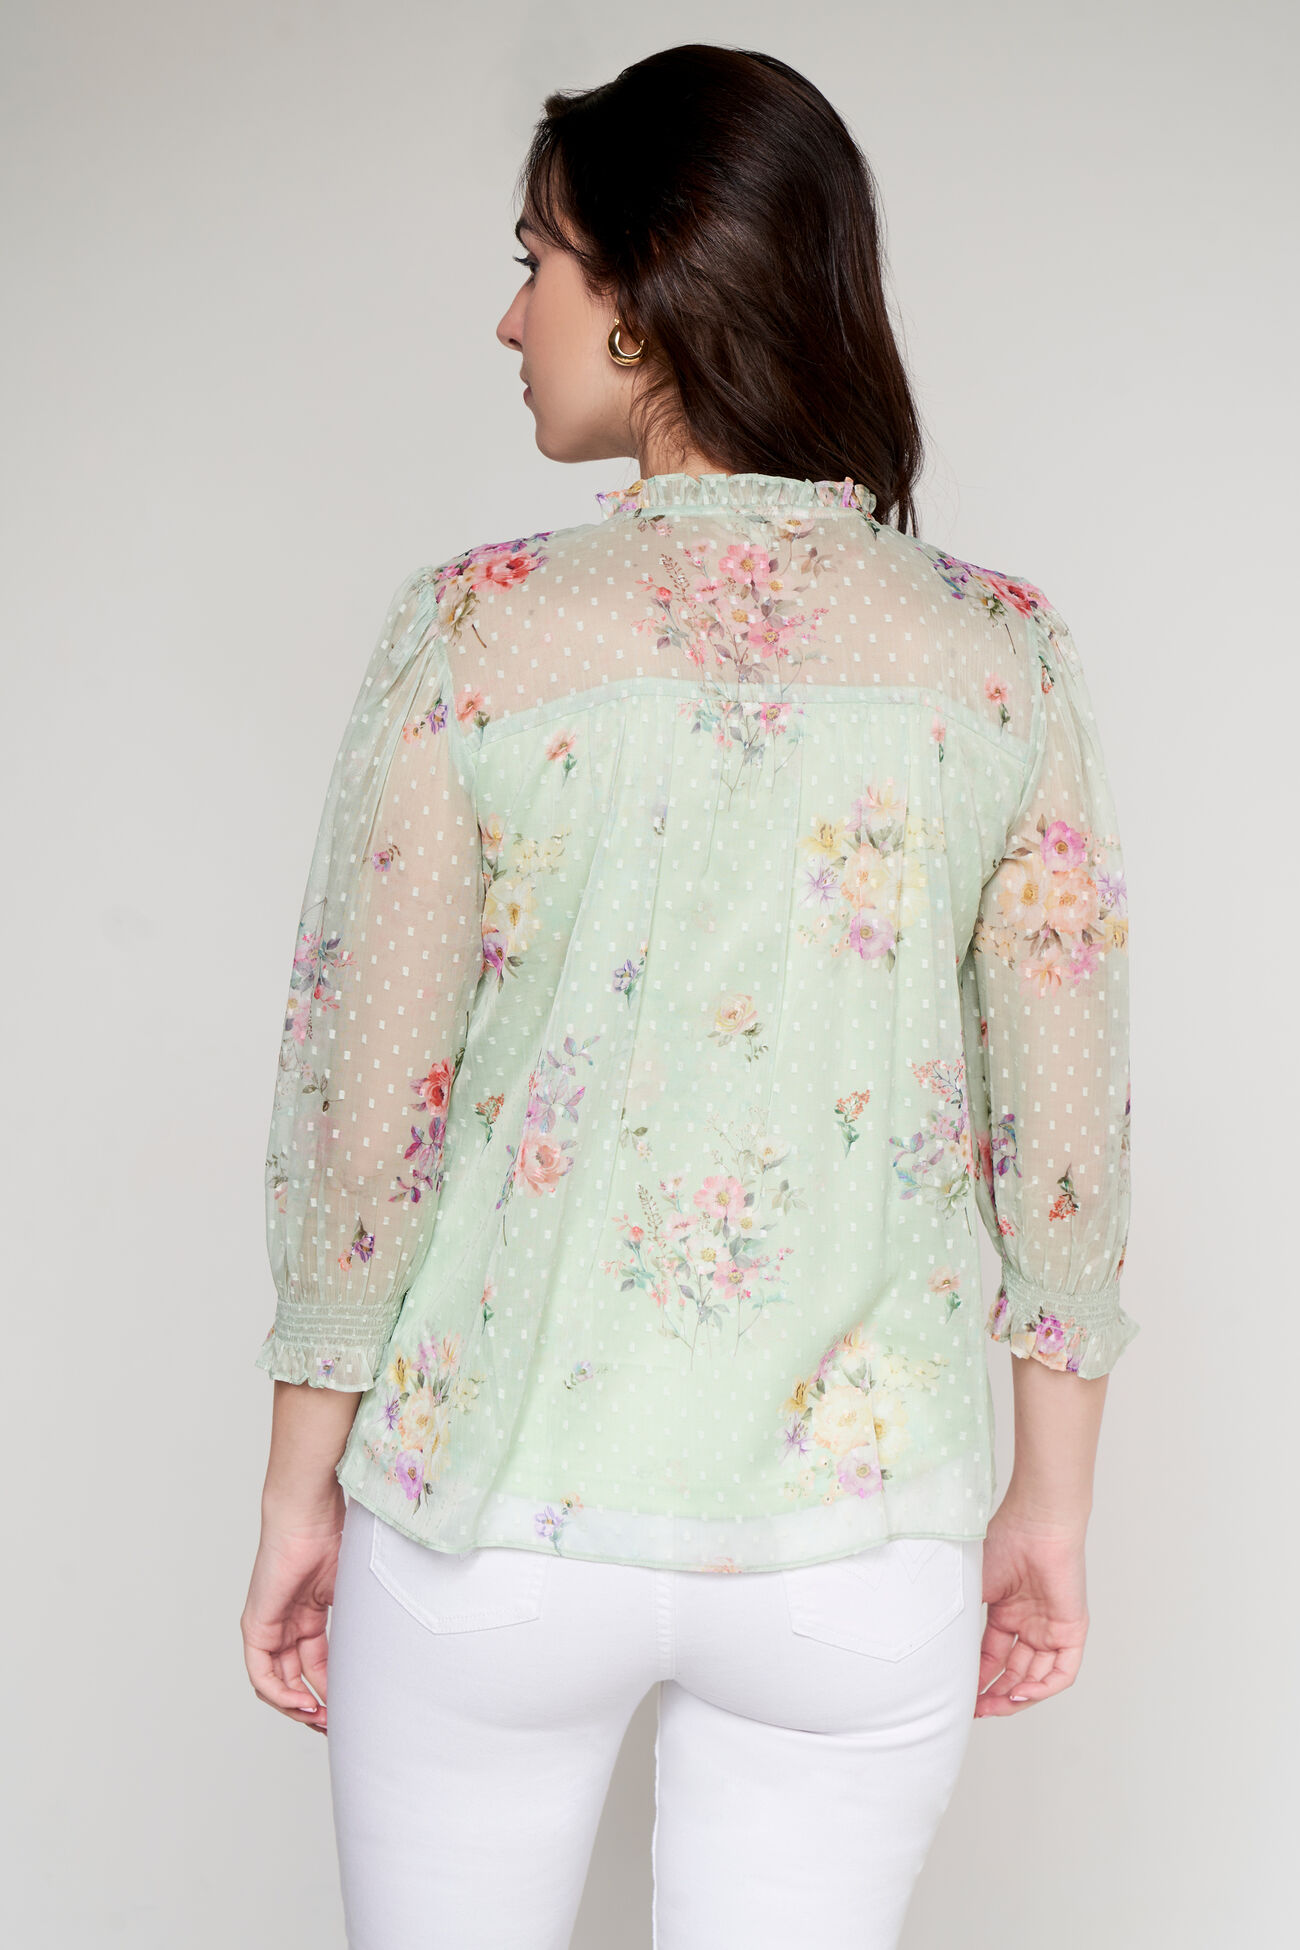 Mint Floral Straight Top, Mint, image 4